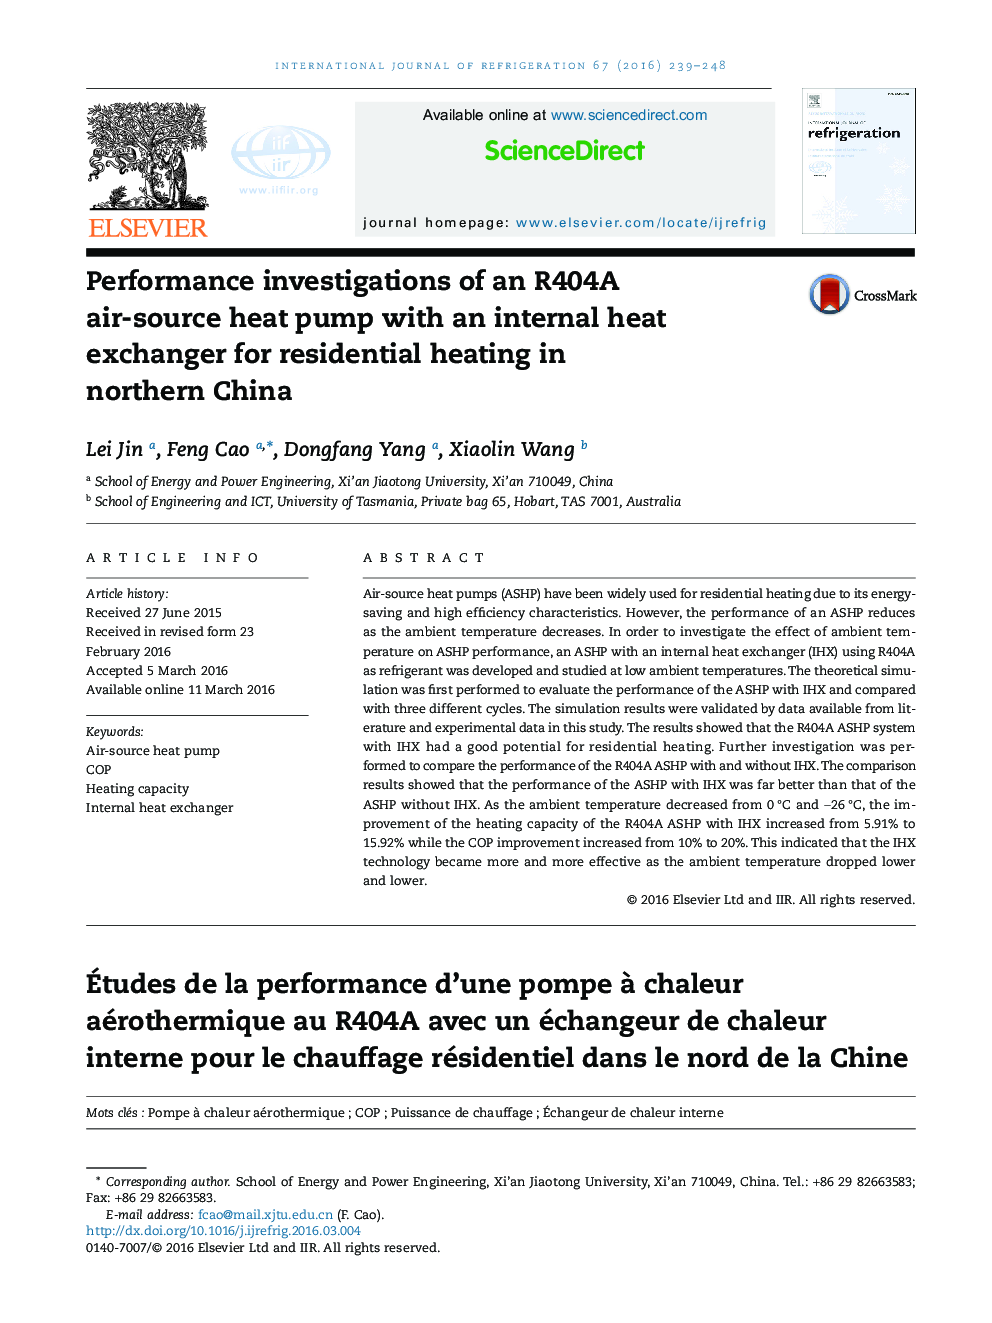 Performance investigations of an R404A air-source heat pump with an internal heat exchanger for residential heating in northern China